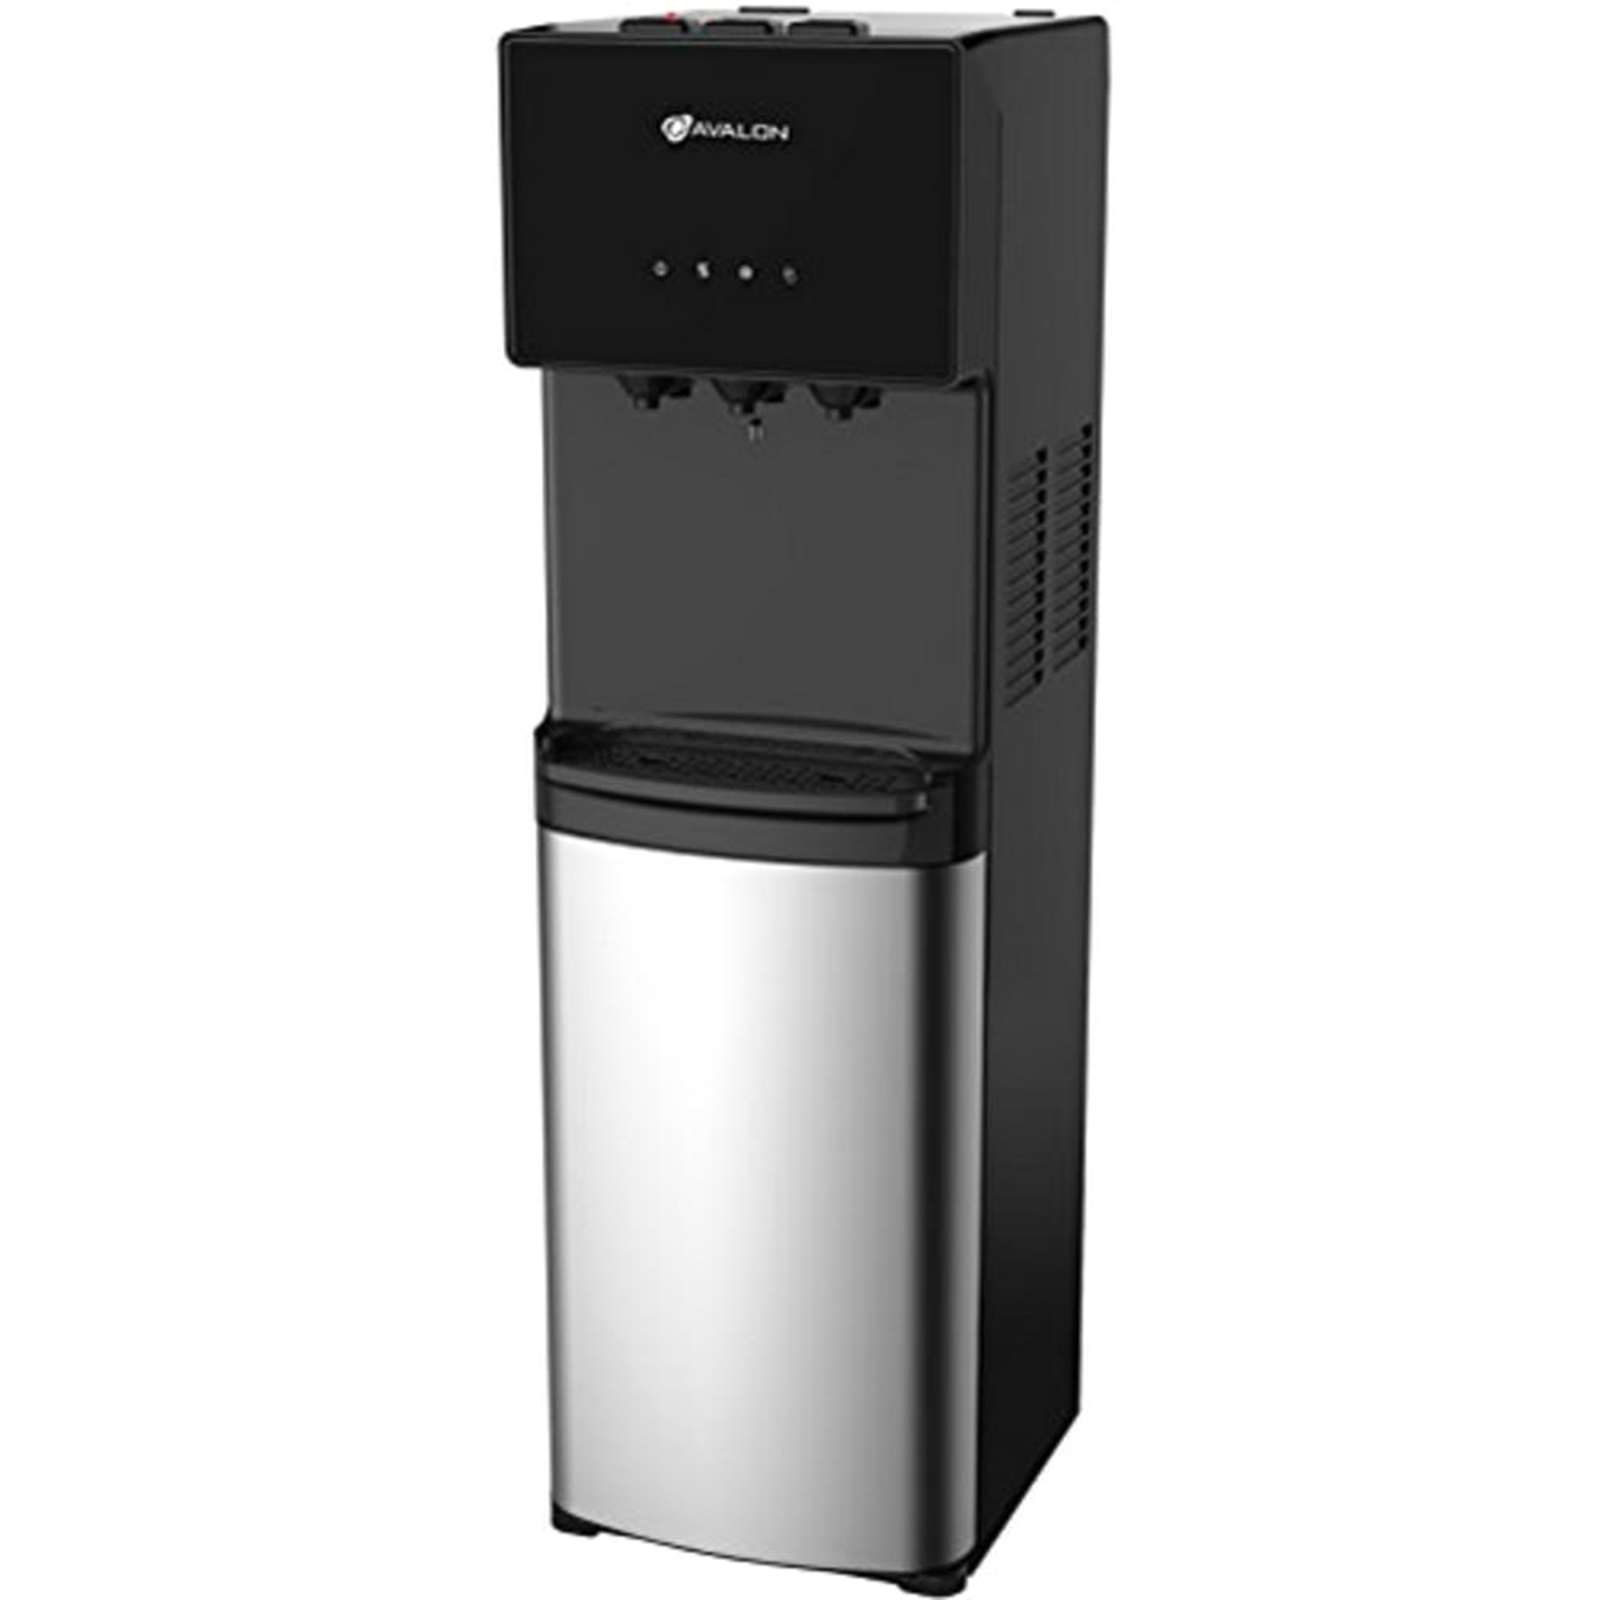 Avalon A4BLWTRCLR 41" Bottom-Loading Stainless Steel Water Dispenser with 3 Temperature Settings